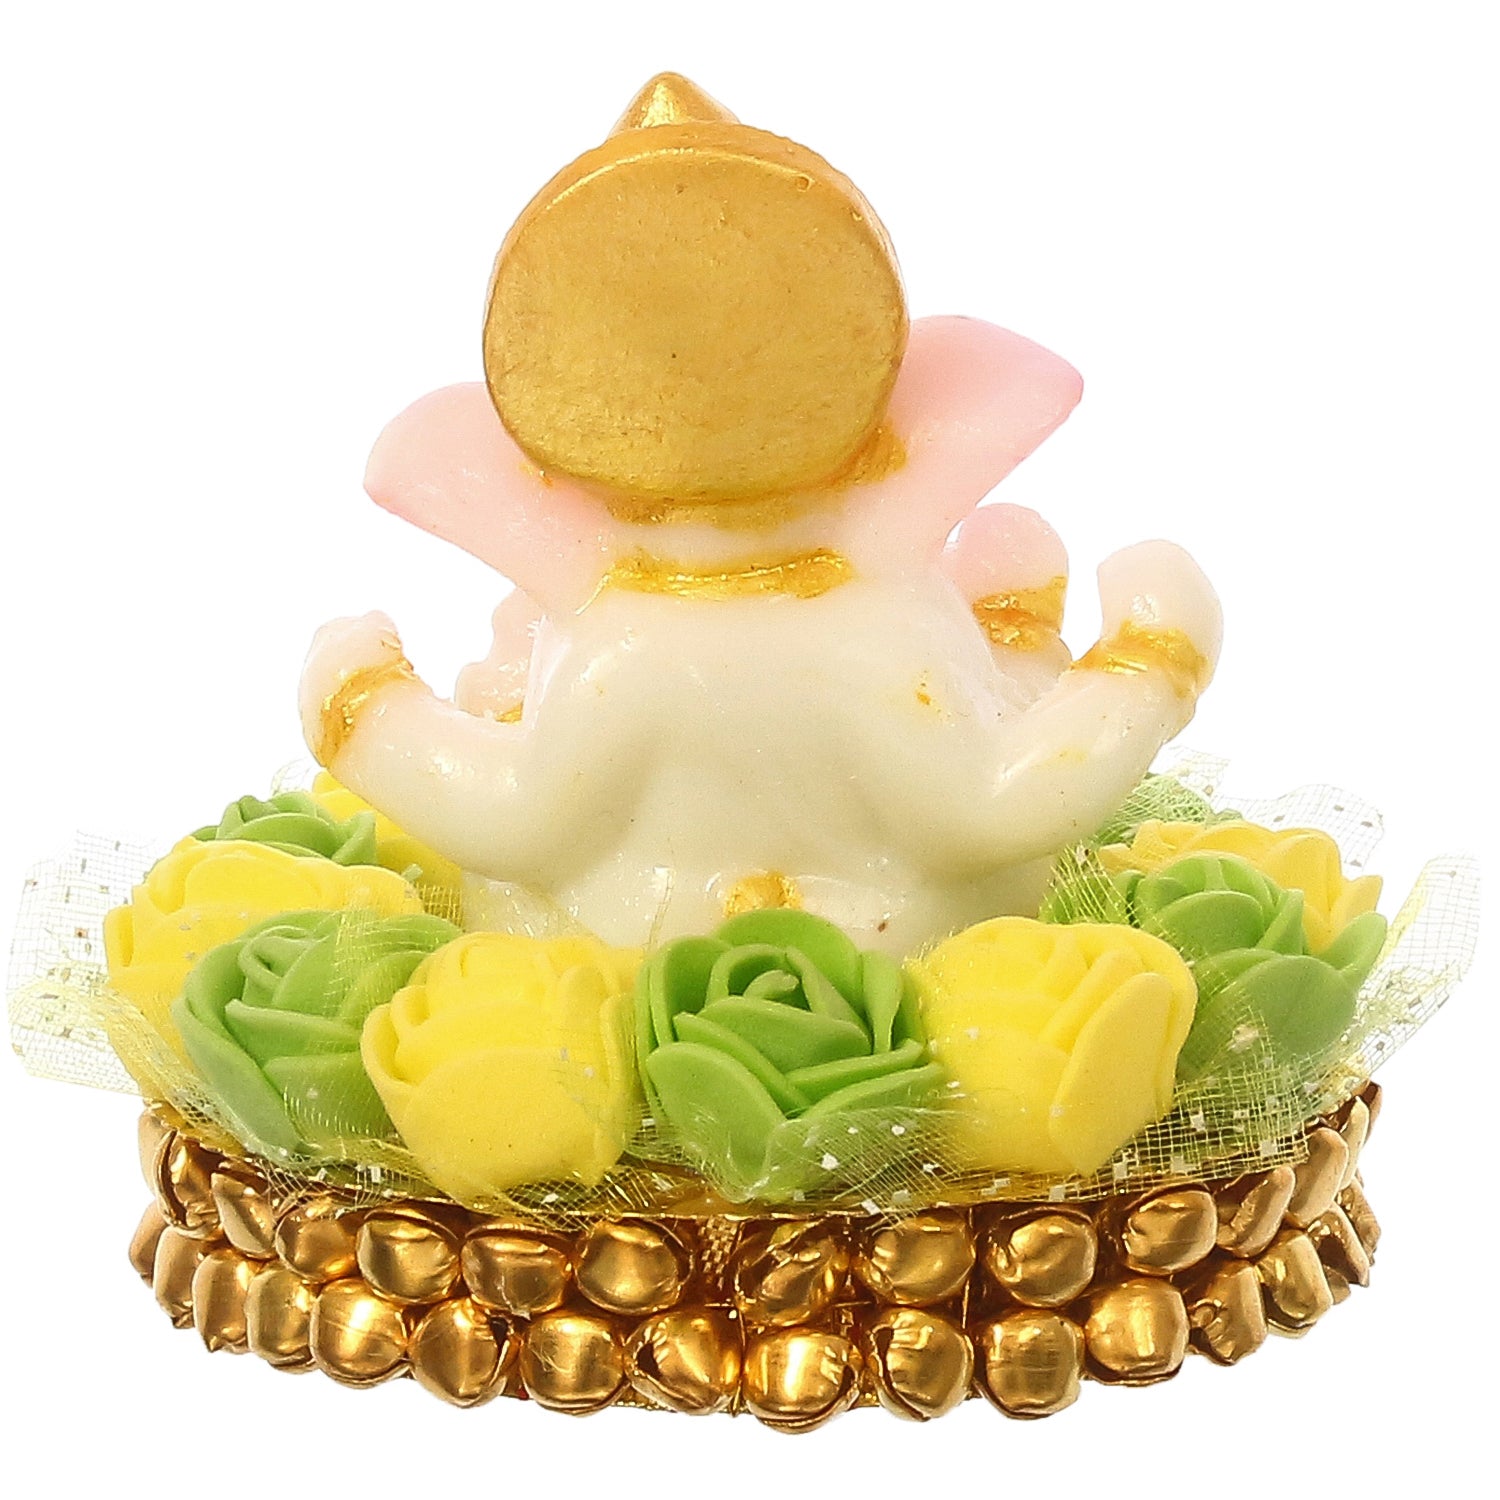 Lord Ganesha Idol On Decorative Handcrafted Green And Yellow Flowers Plate 6